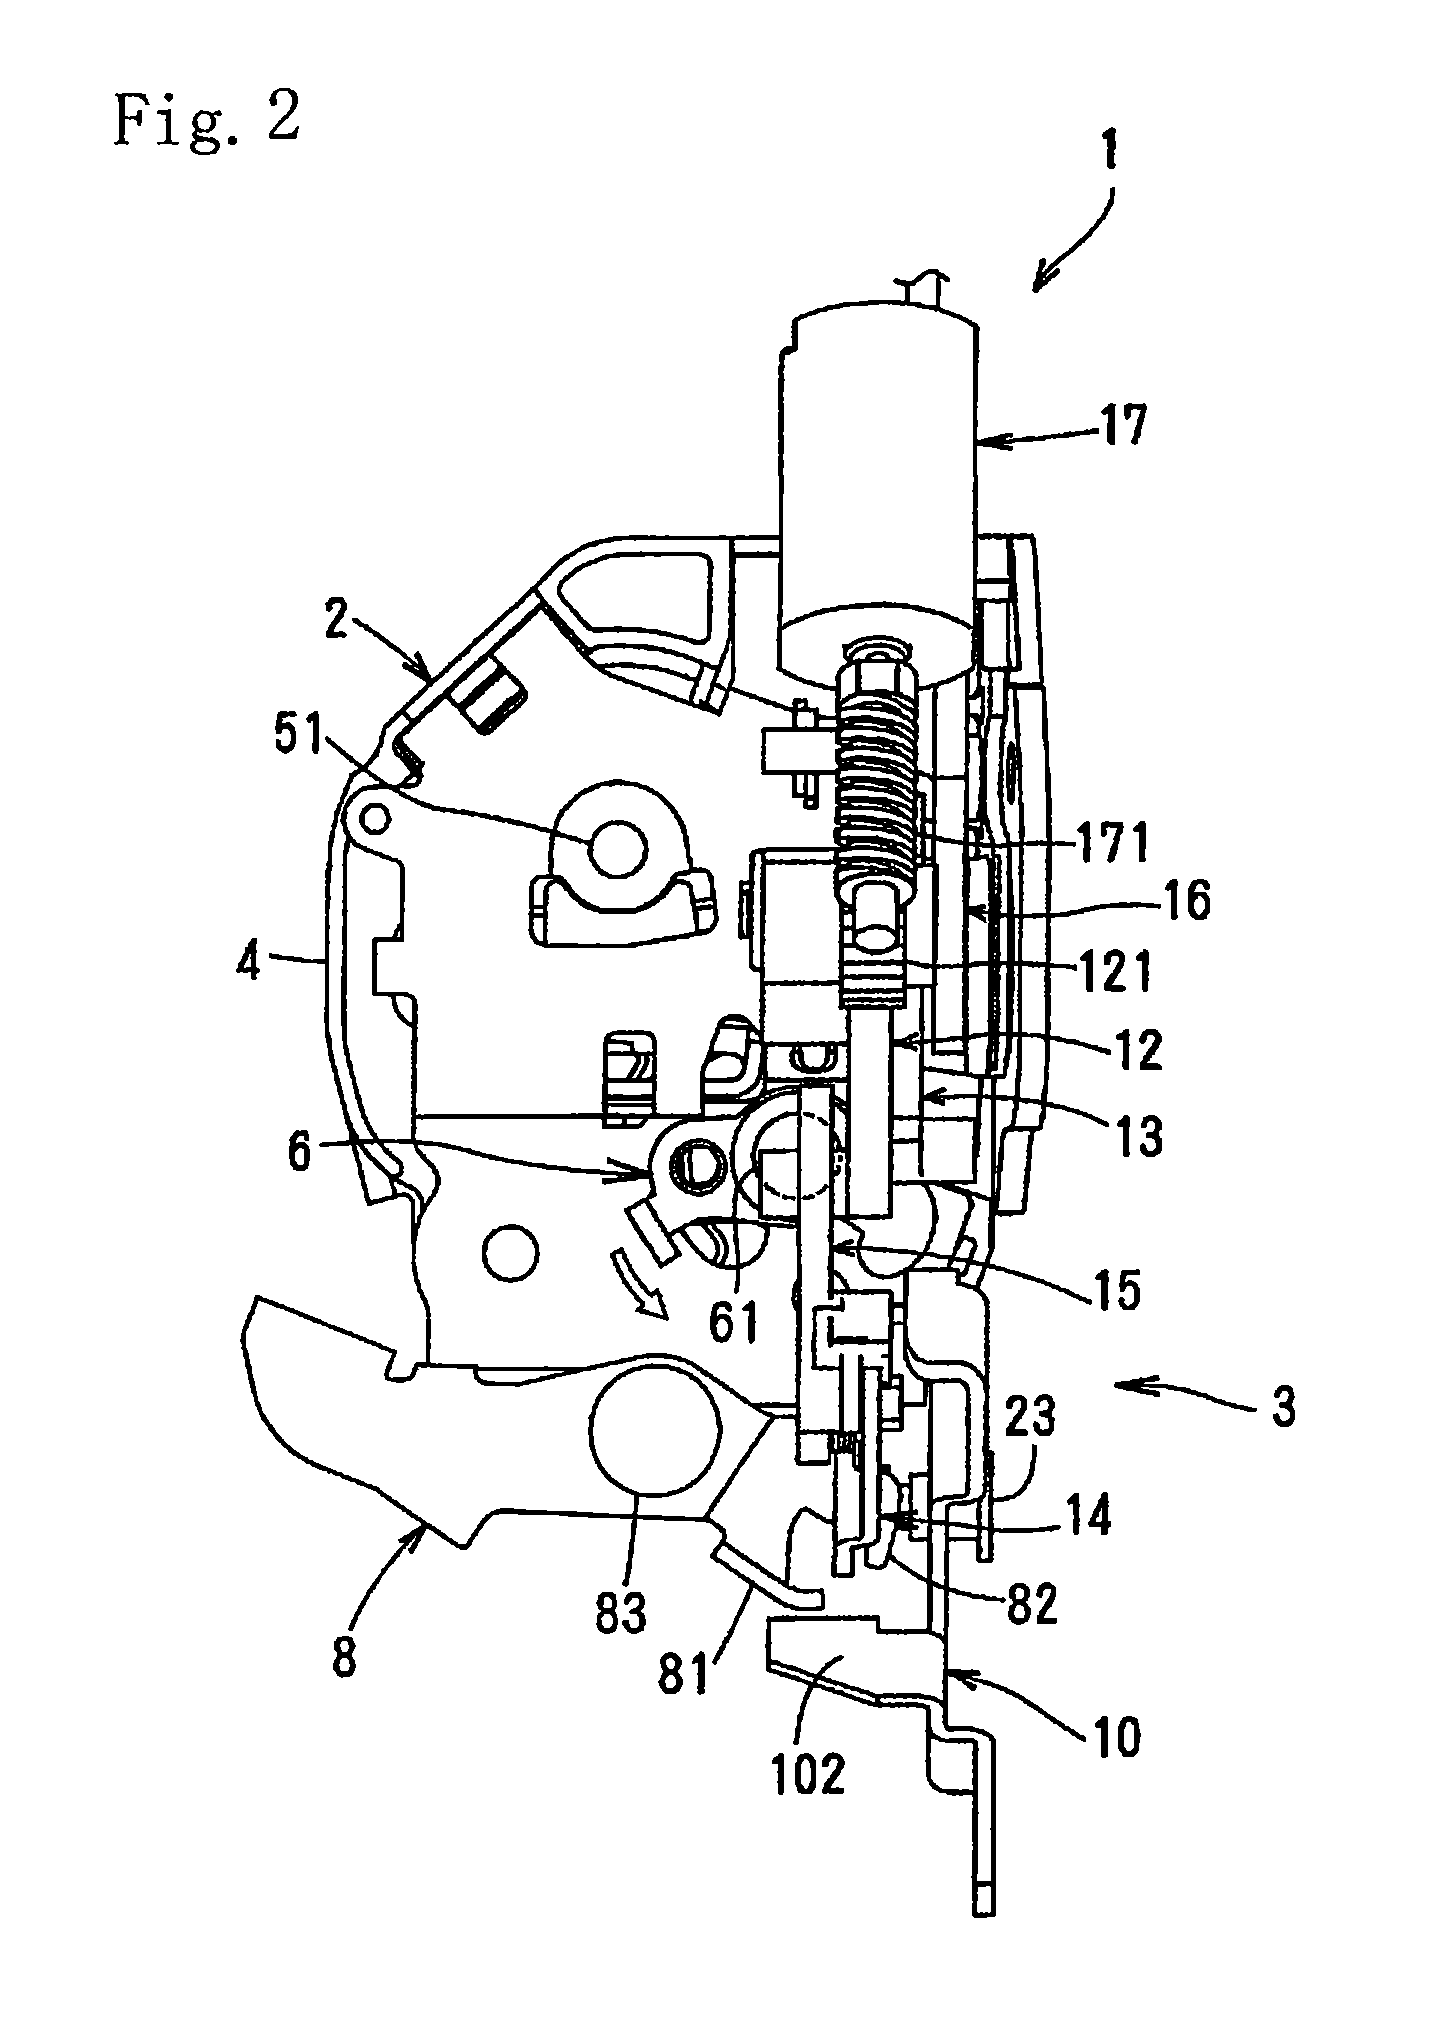 Door latch device for a motor vehicle